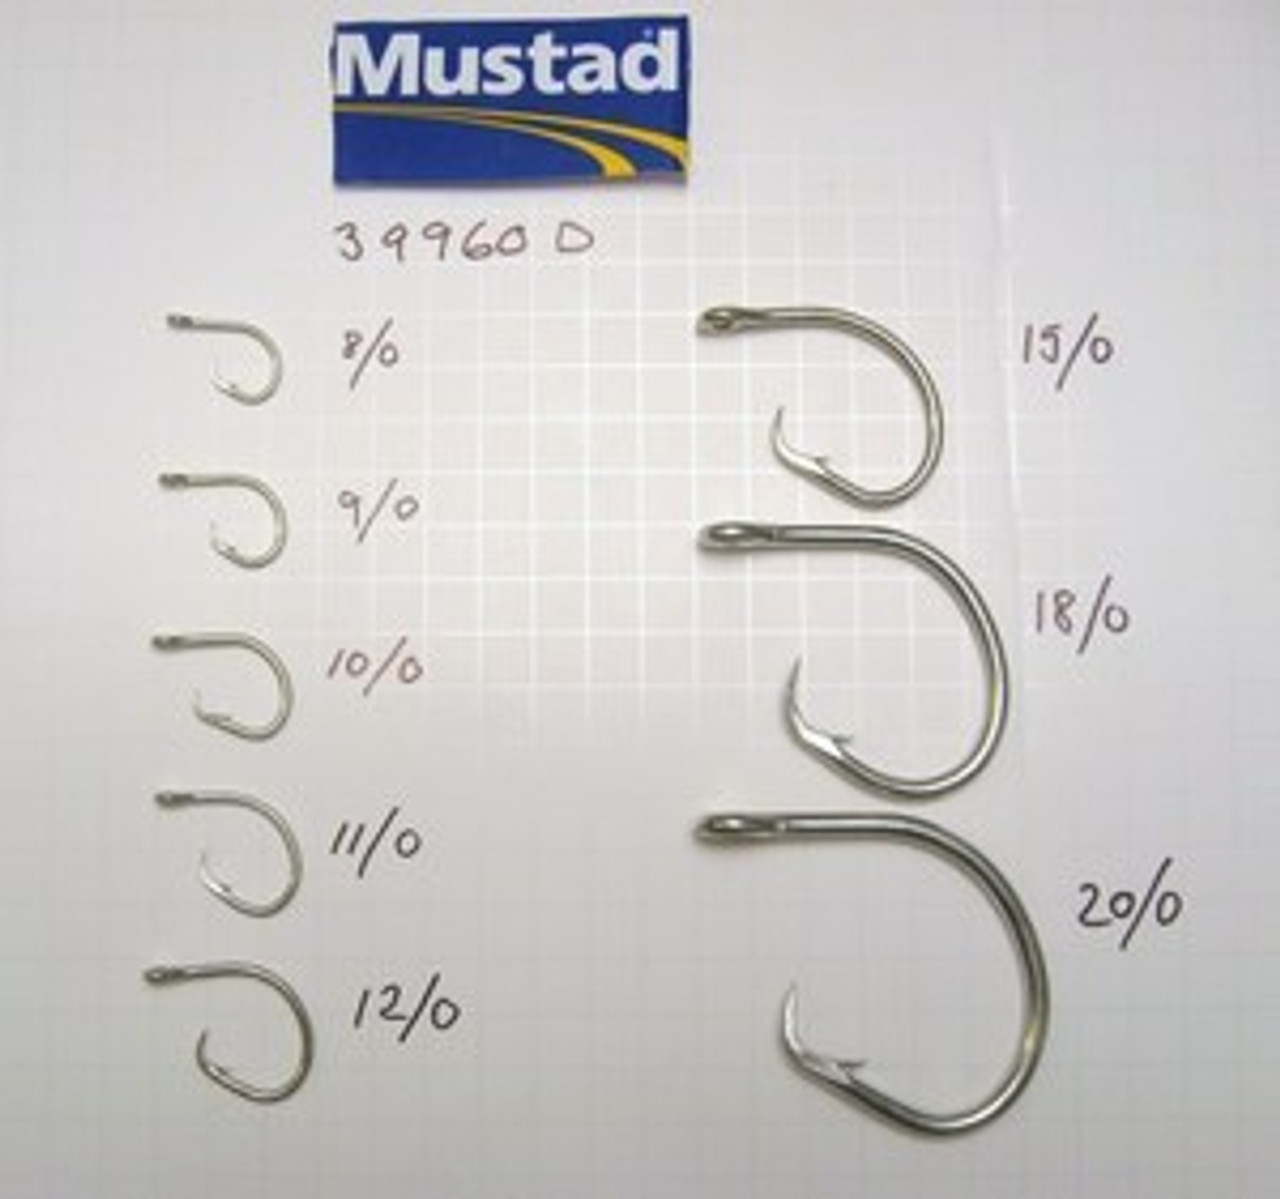 MUSTAD 39960D CIRCLE-Ringed eye Duratin Available in bags of 25